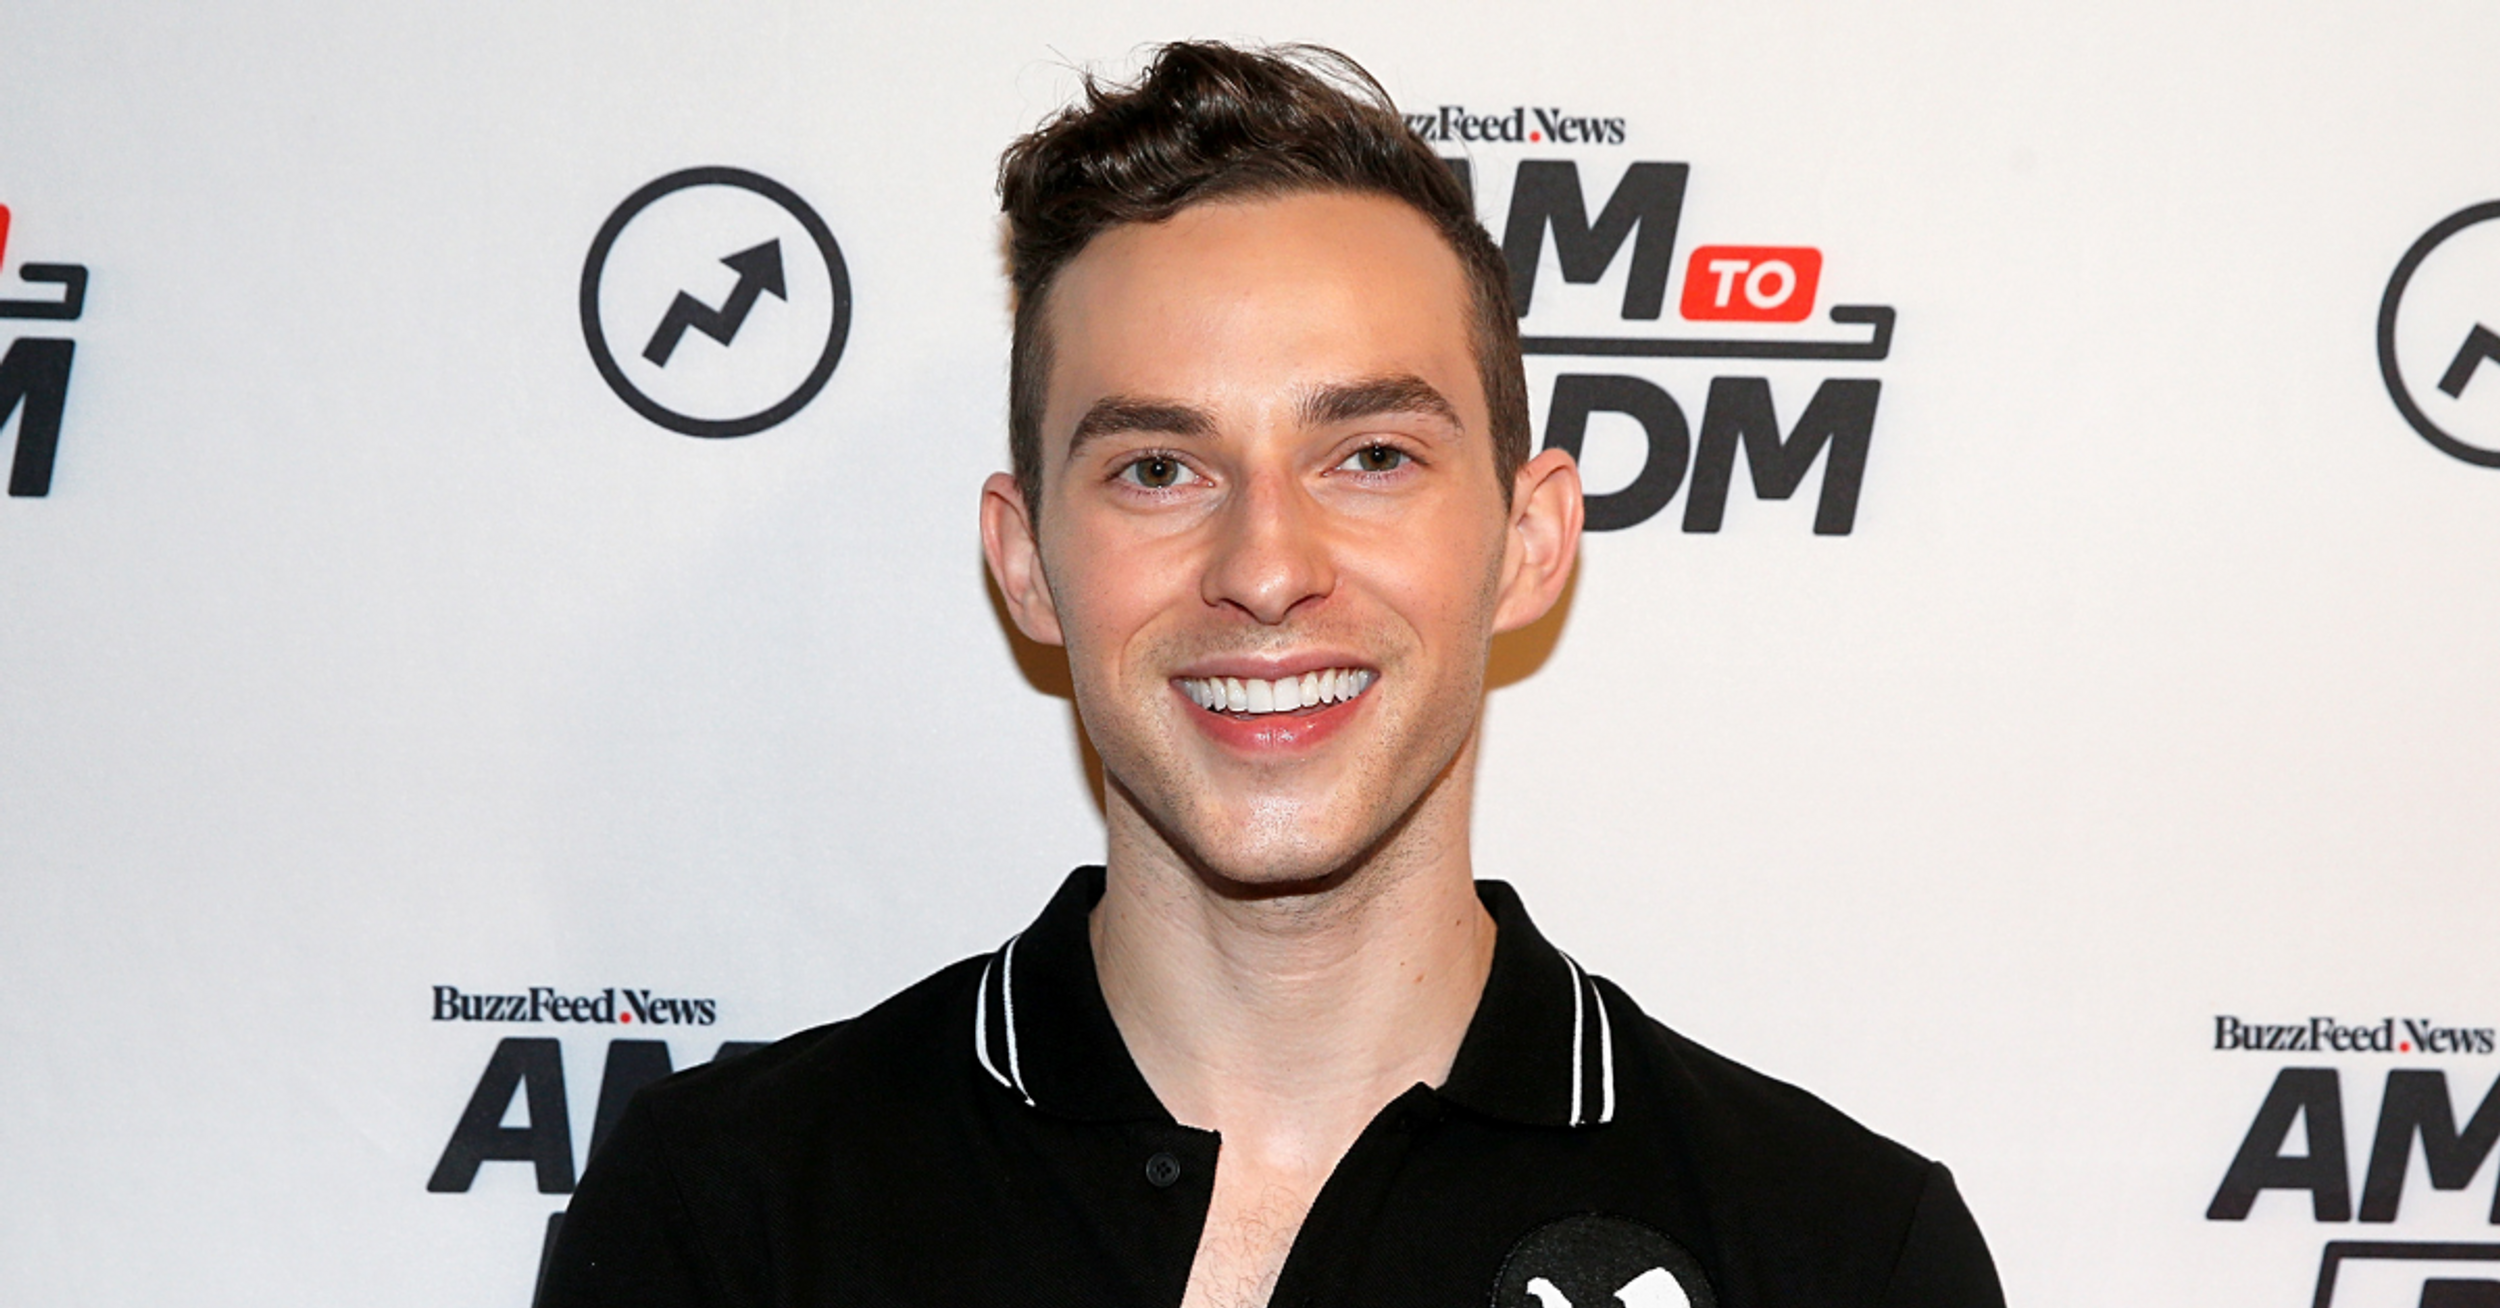 Olympic Figure Skater Adam Rippon Delights Fans By Announcing He Got Married: 'Surprise!'